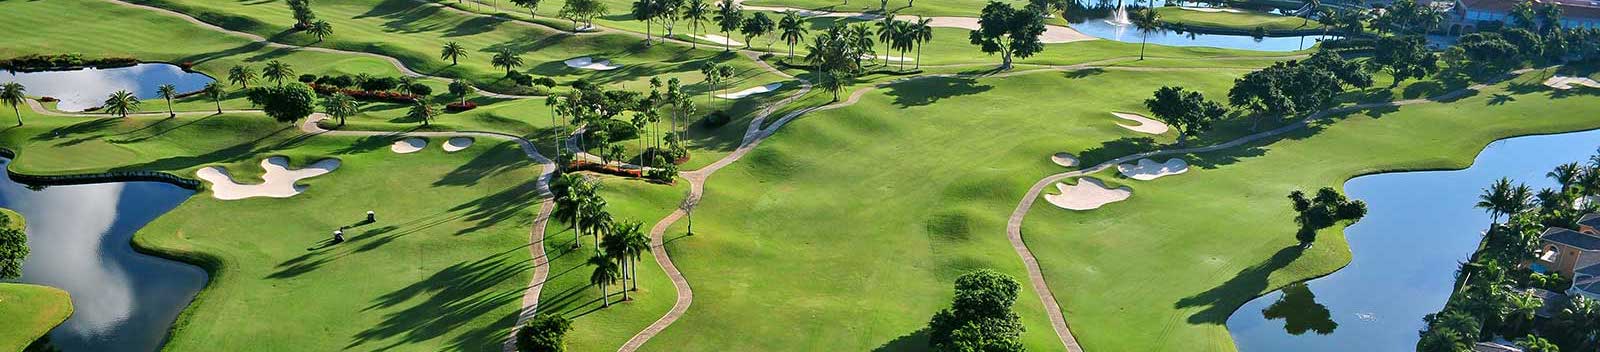 aerial view of nice florida municipal golf course